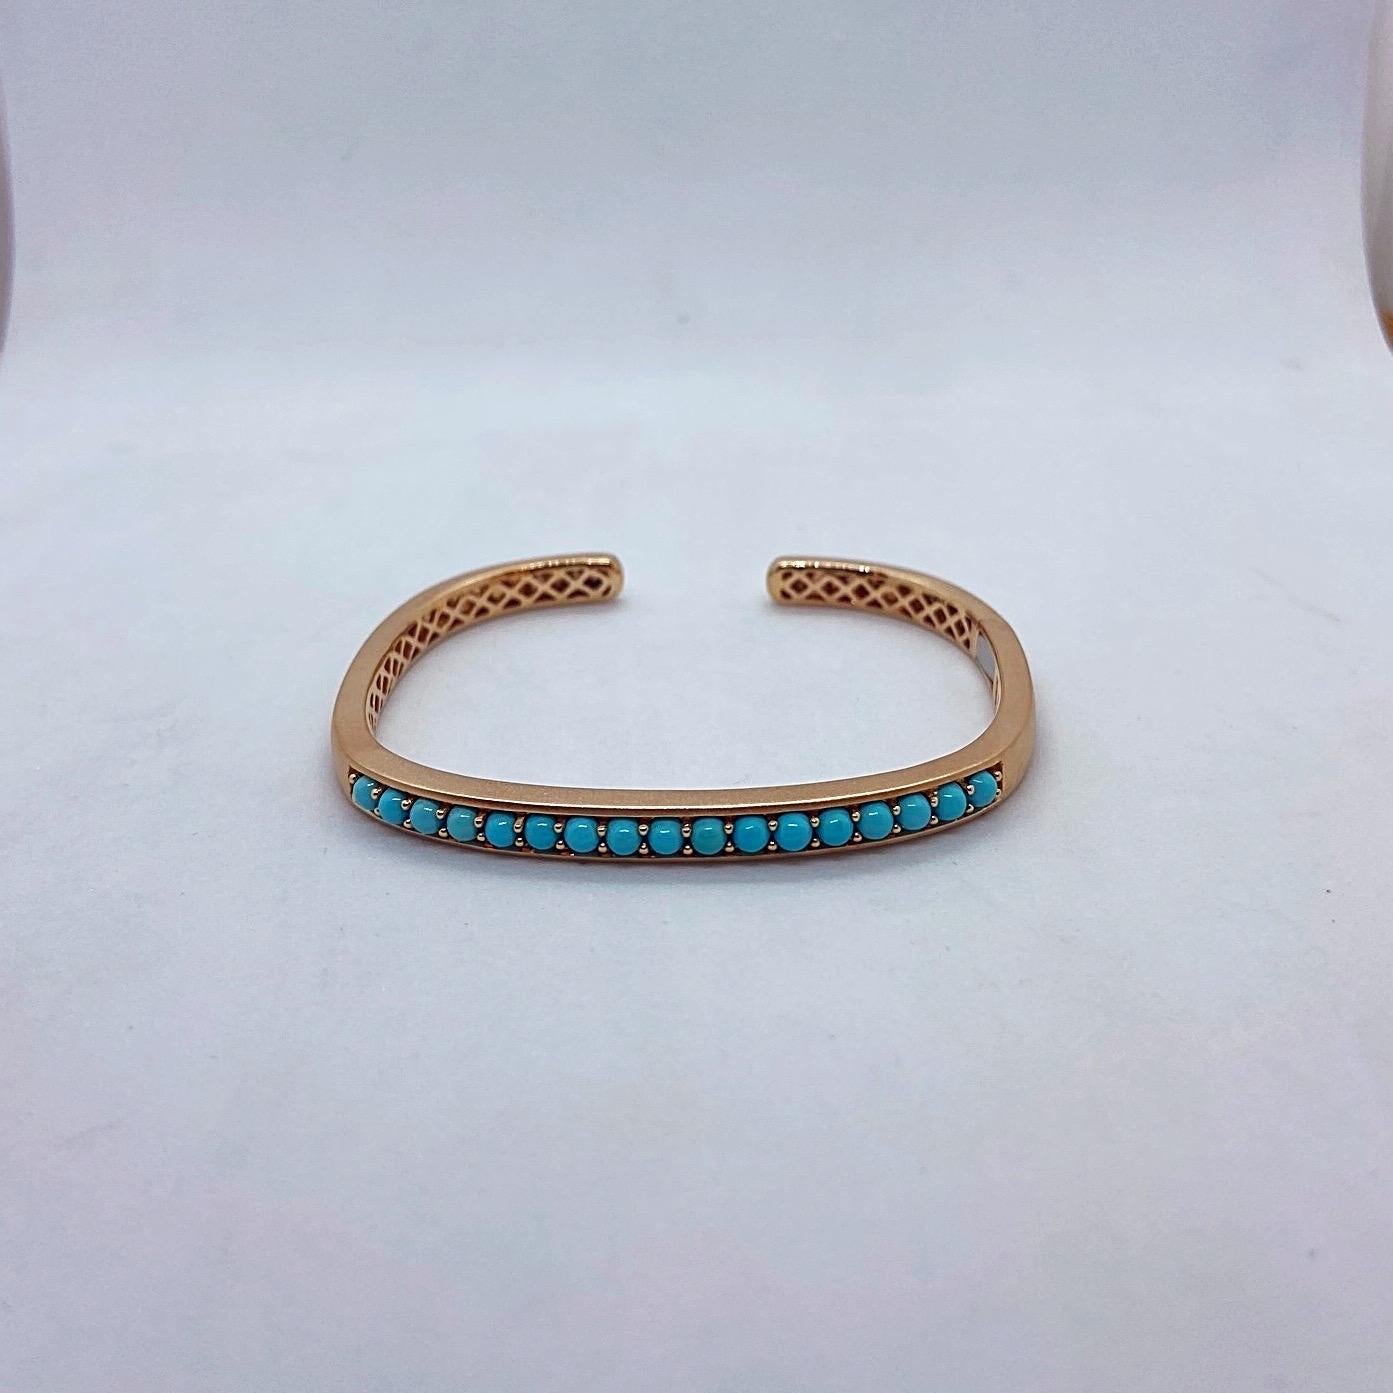 Jane Taylor 18 Karat Rose Gold Cuff Bracelet with Cabochon Turquoise In New Condition For Sale In New York, NY